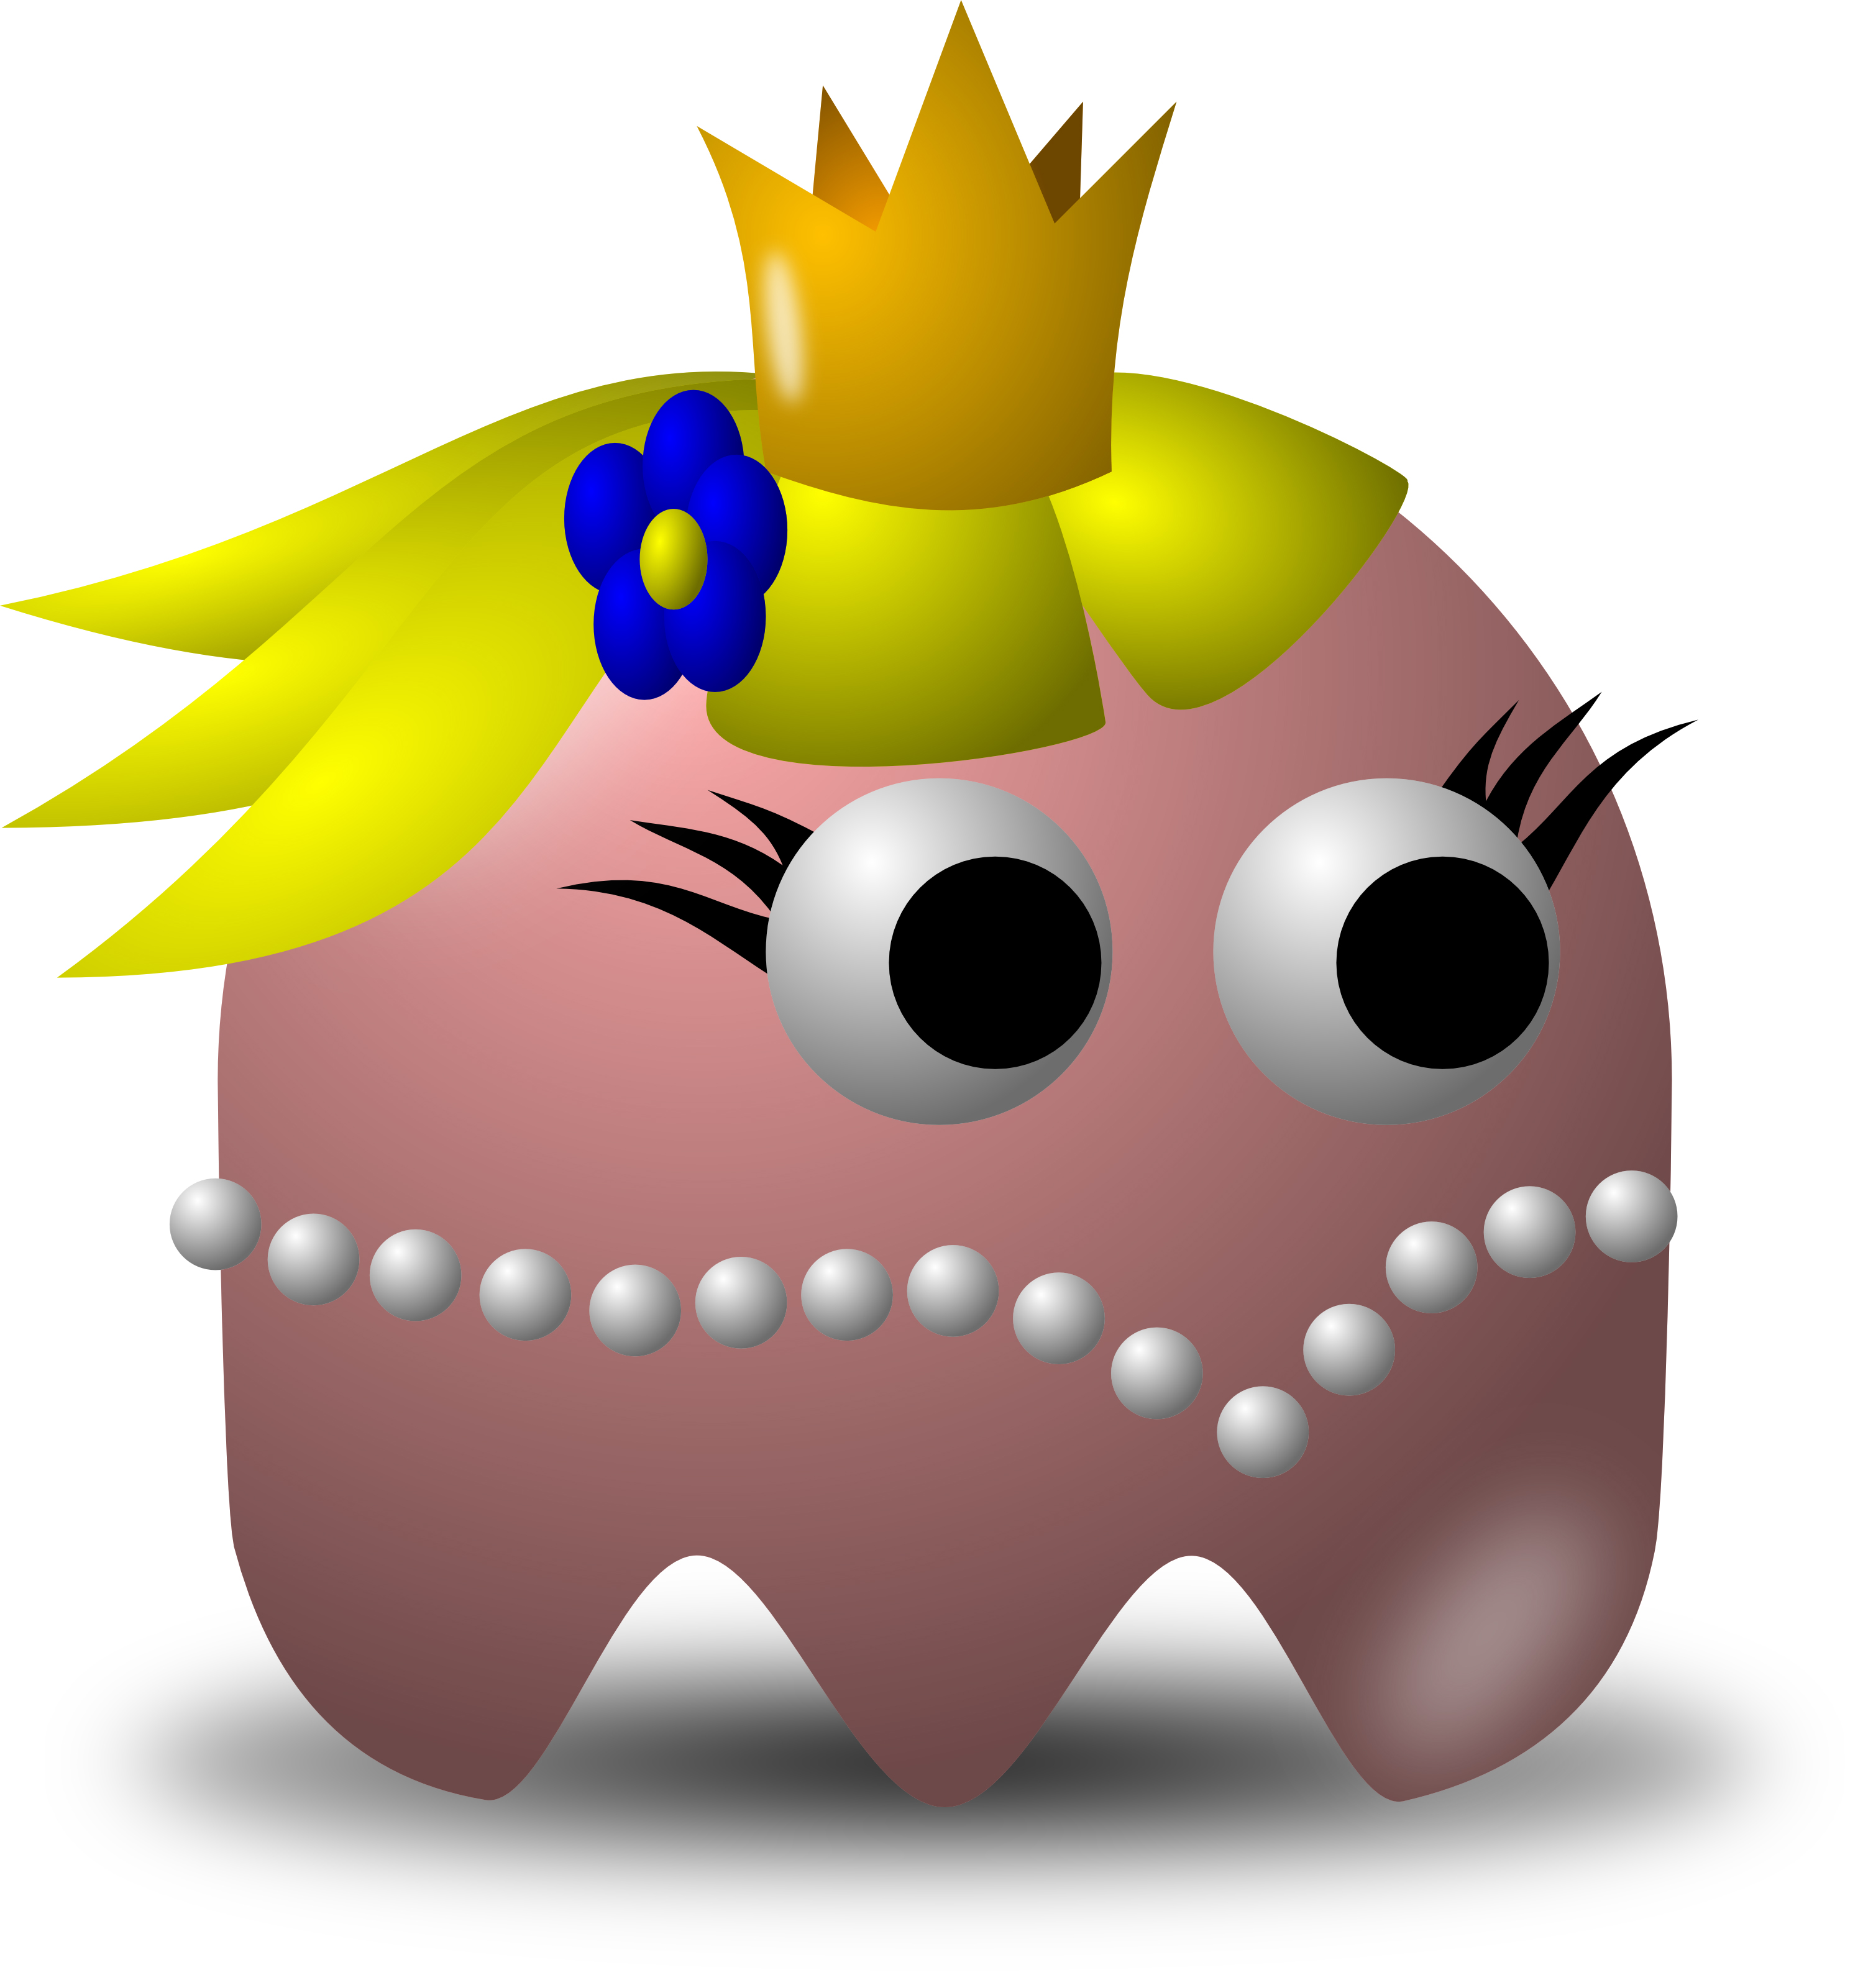 Clipart Free Royalty image